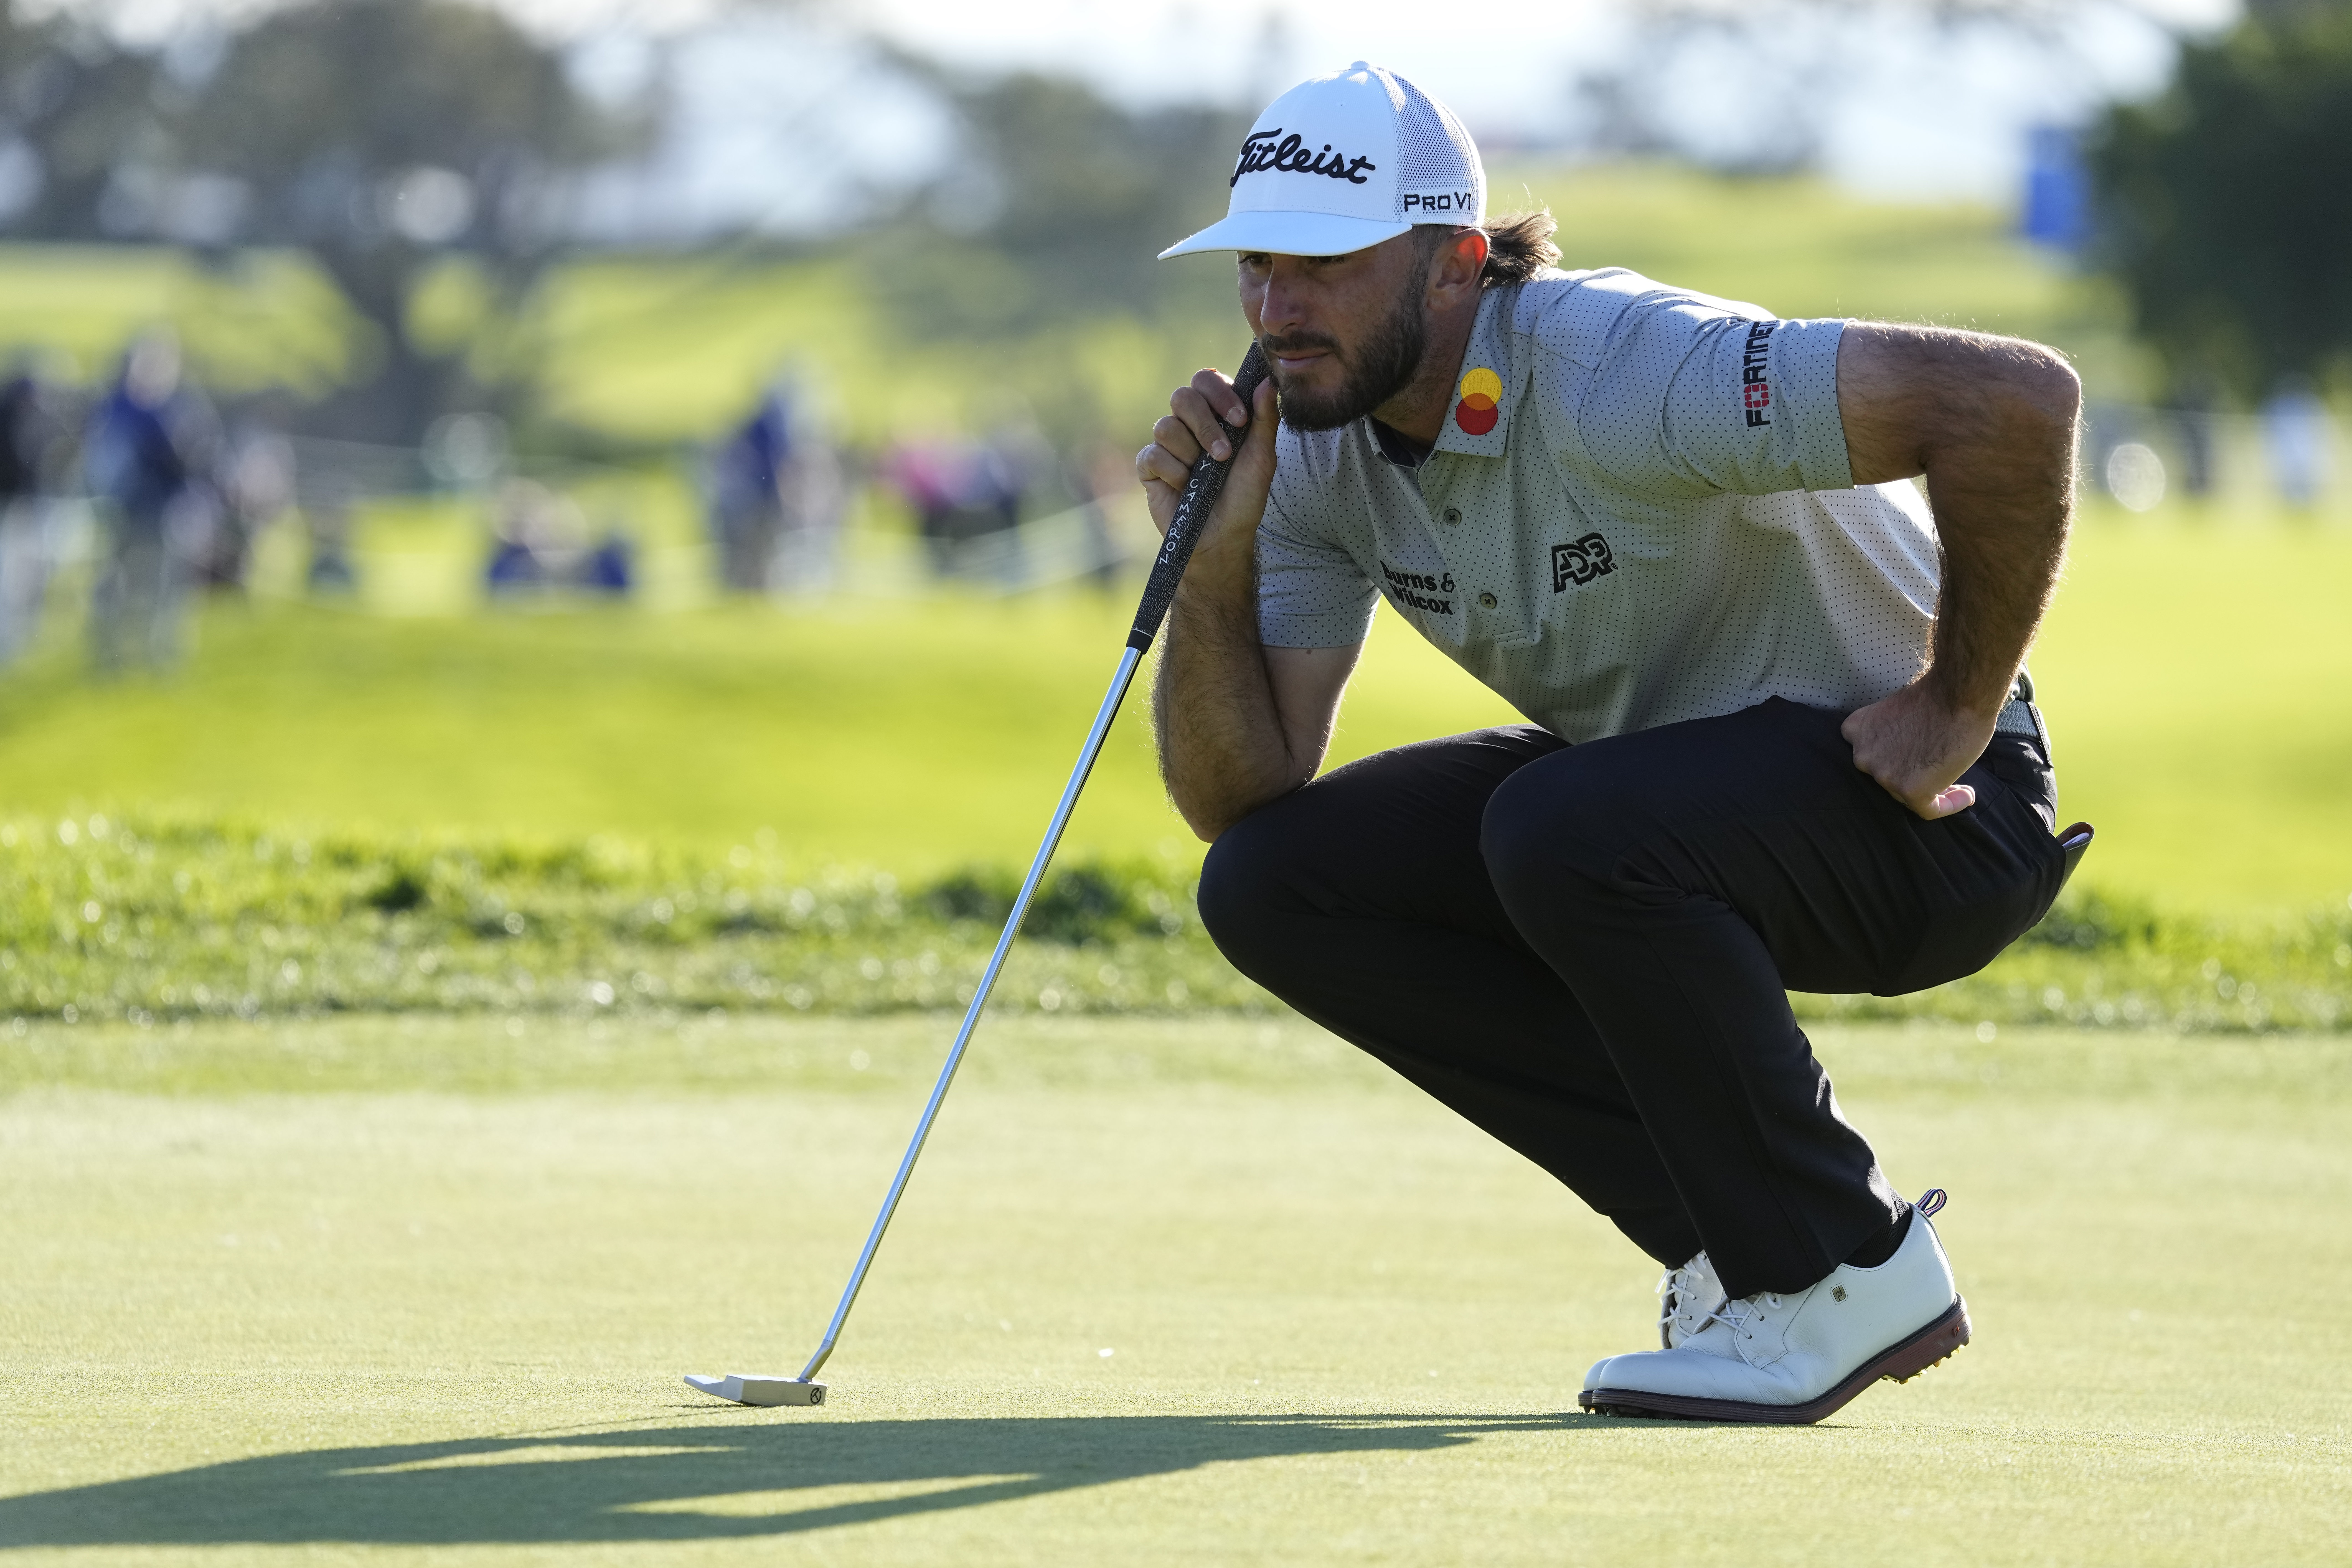 Watch: Max Homa Breaks Down Strategy, More in Epic Mid-Round Interview - Sports Illustrated